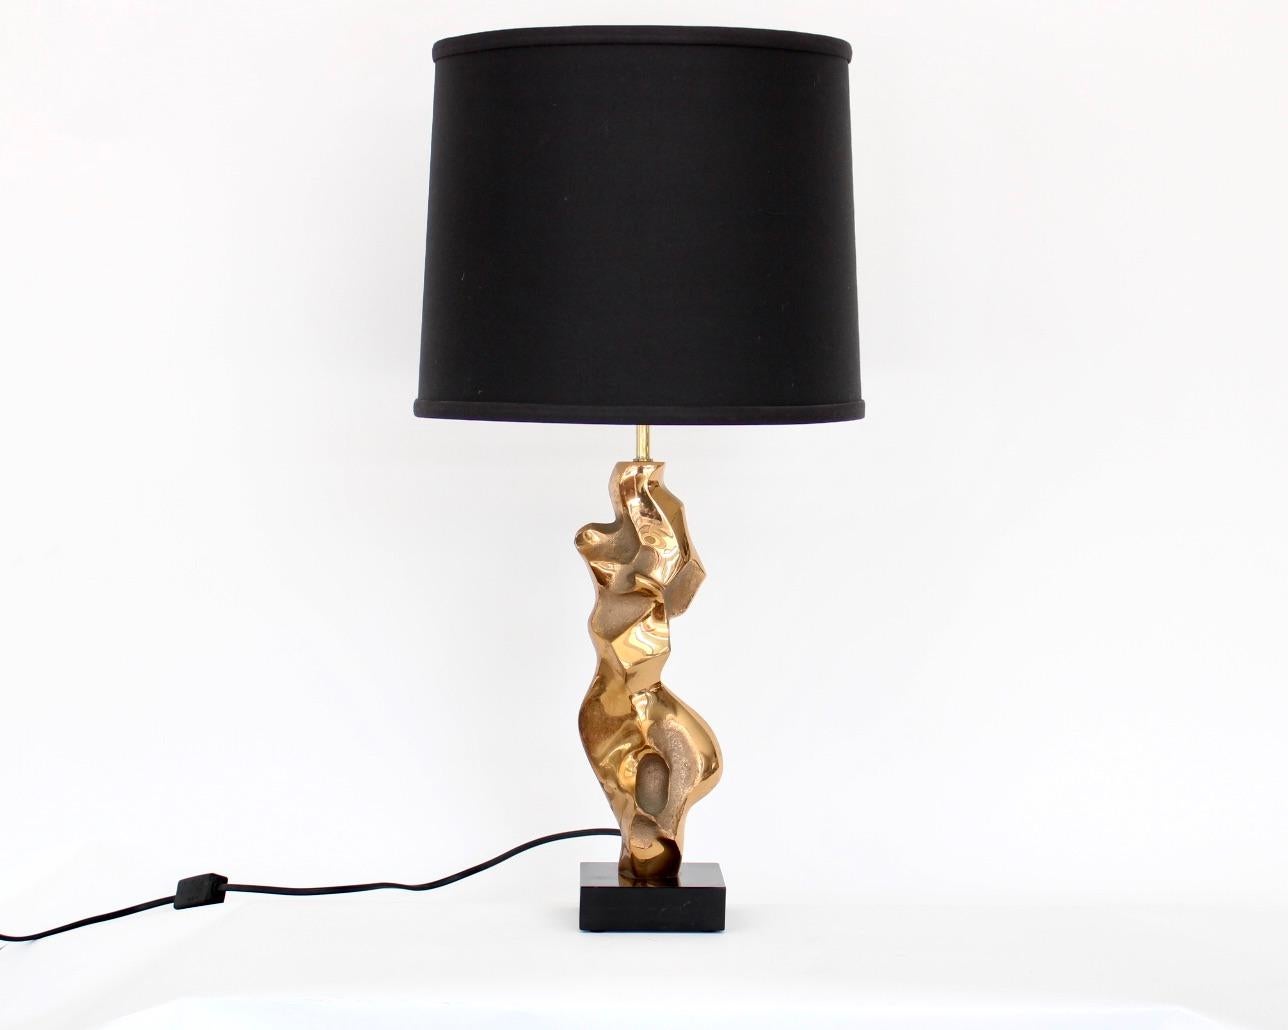 French cast bronze sculptural table lamp, signed M Jaubert, France, circa 1960-1970
Composed of a cast abstract bronze sculpture on a black marble base.
Signed near bottom on bronze.
Signs of vintage use on base. 
This shade can be included in the